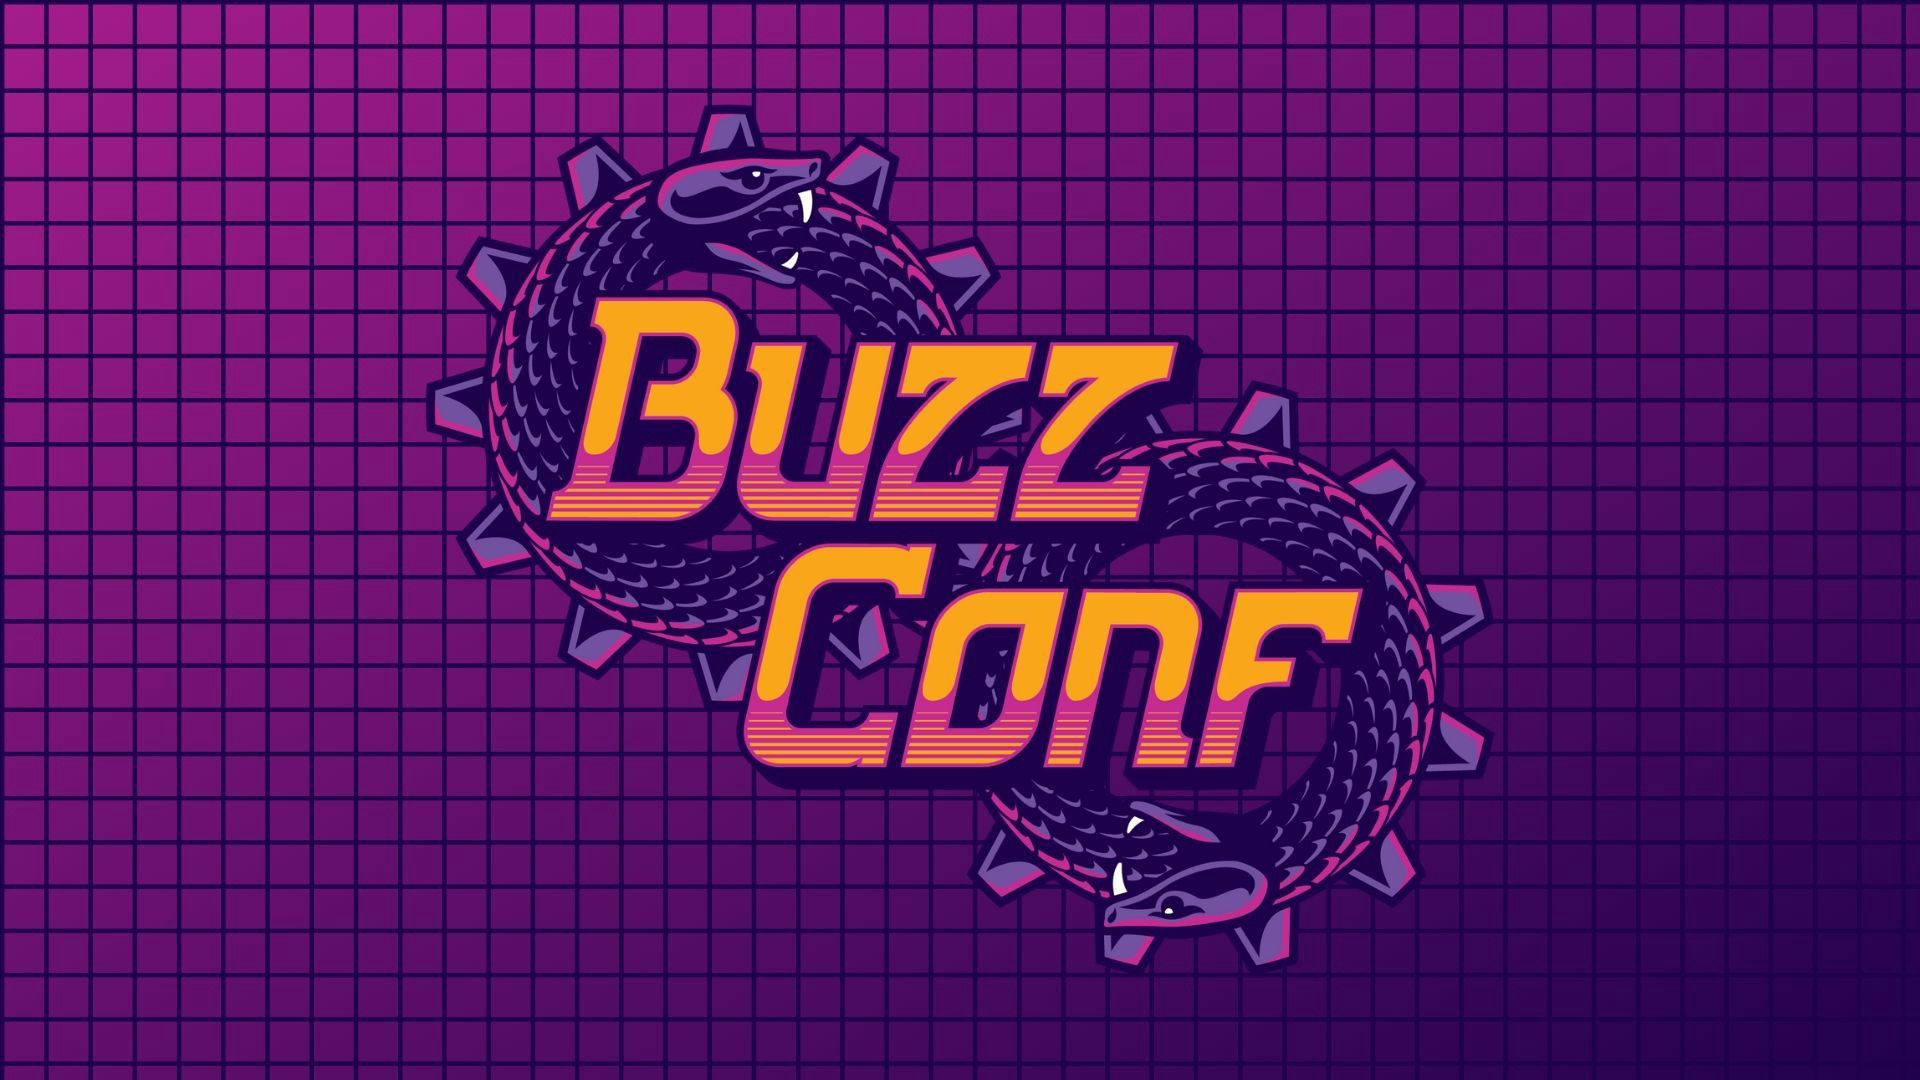 For the first time, enjoy all the talks of BuzzConf 2020 online and free of charge!